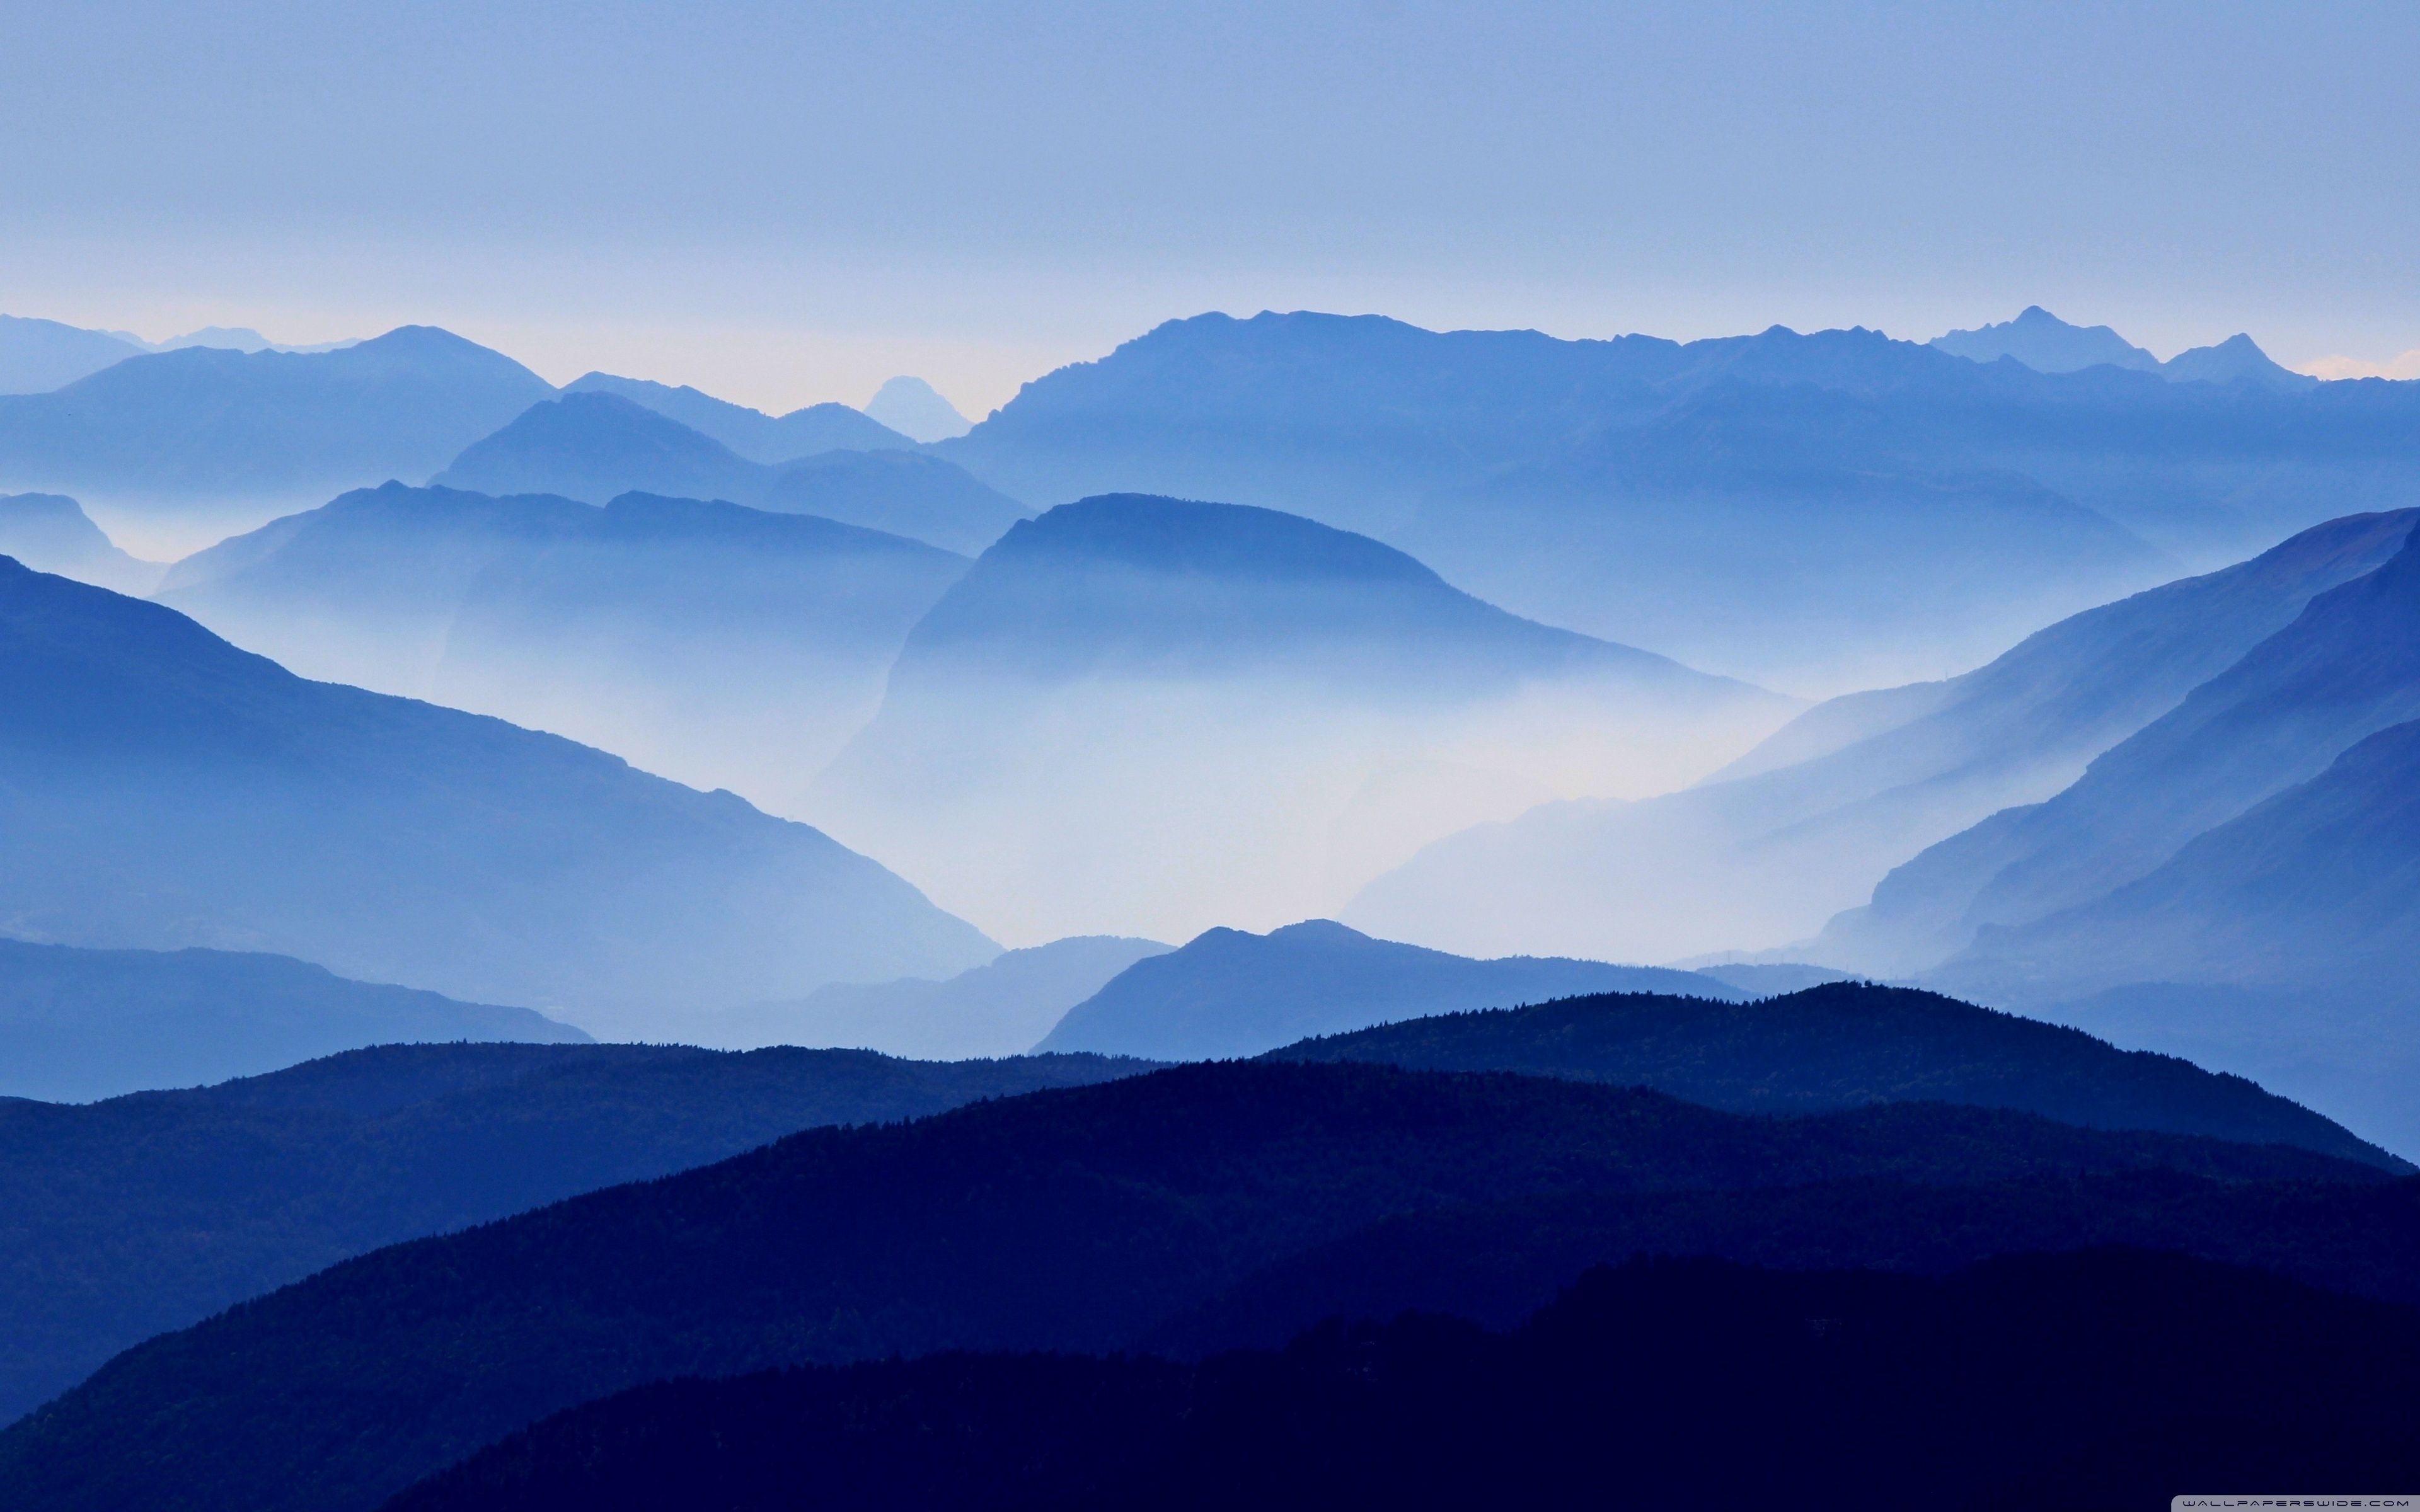 A view of mountains with fog in the background - Mountain